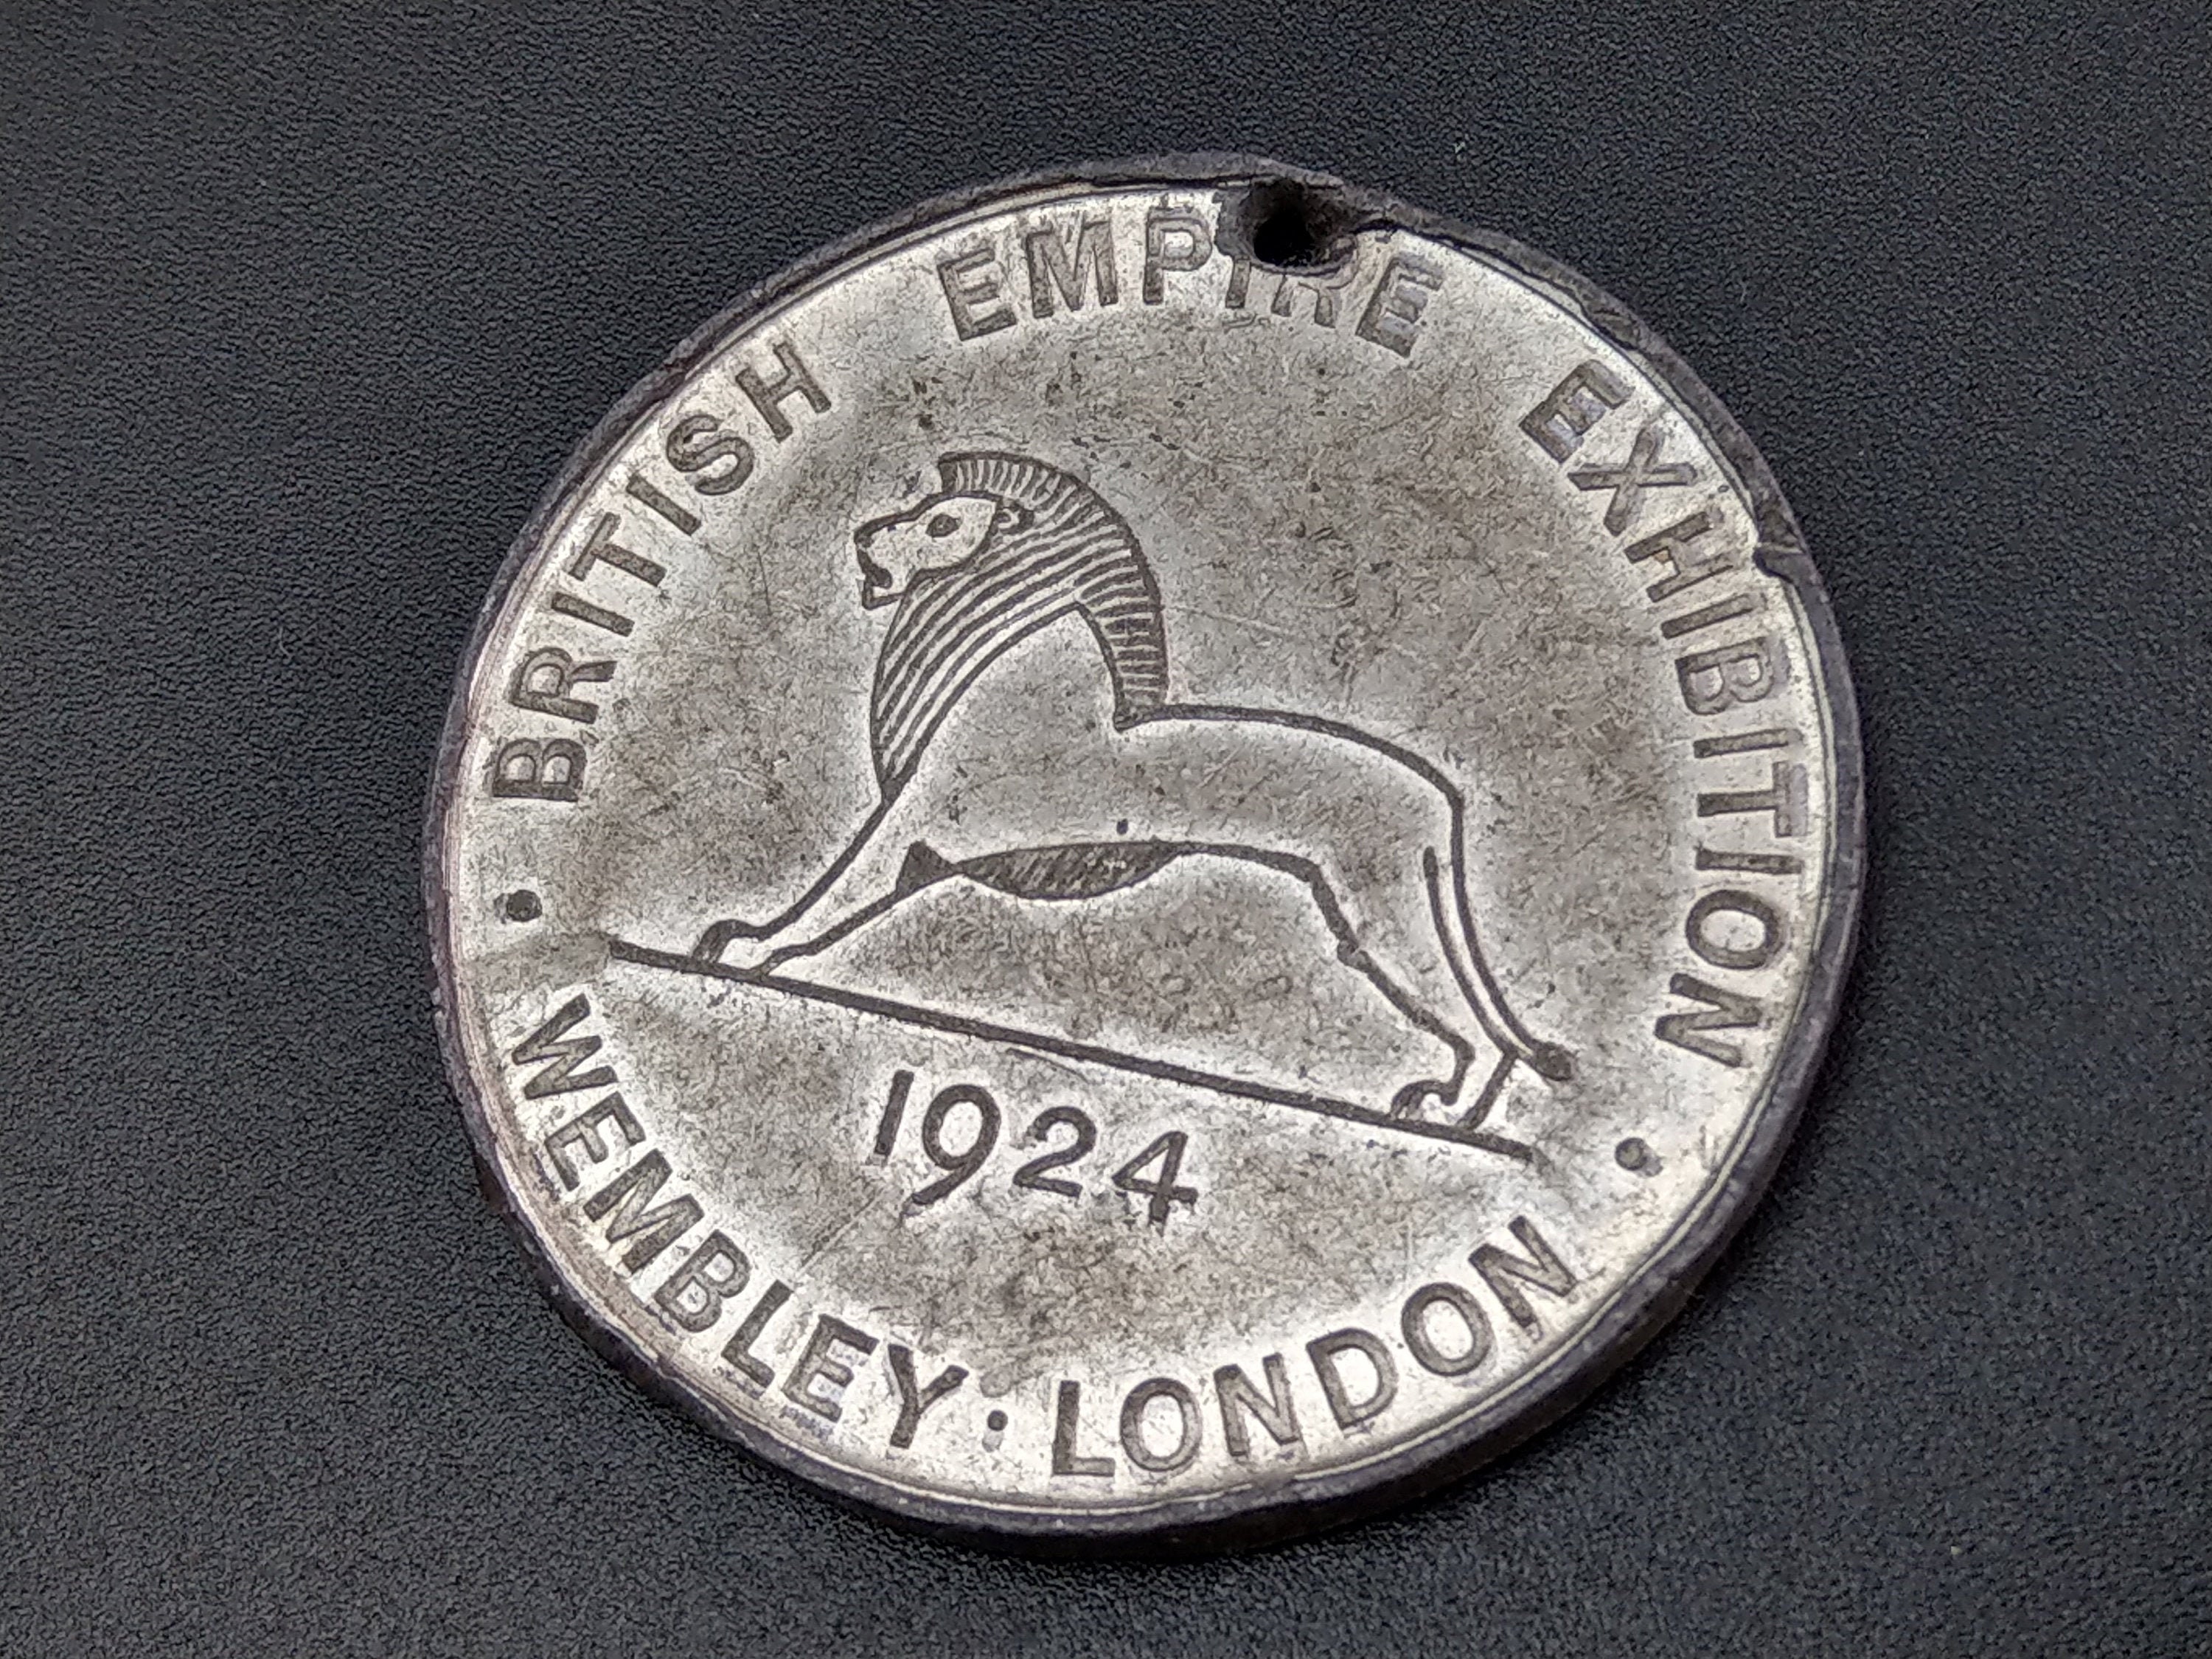 British Empire Exhibition Souvenir Medal 1924 Issued By D and W Gibbs Ltd